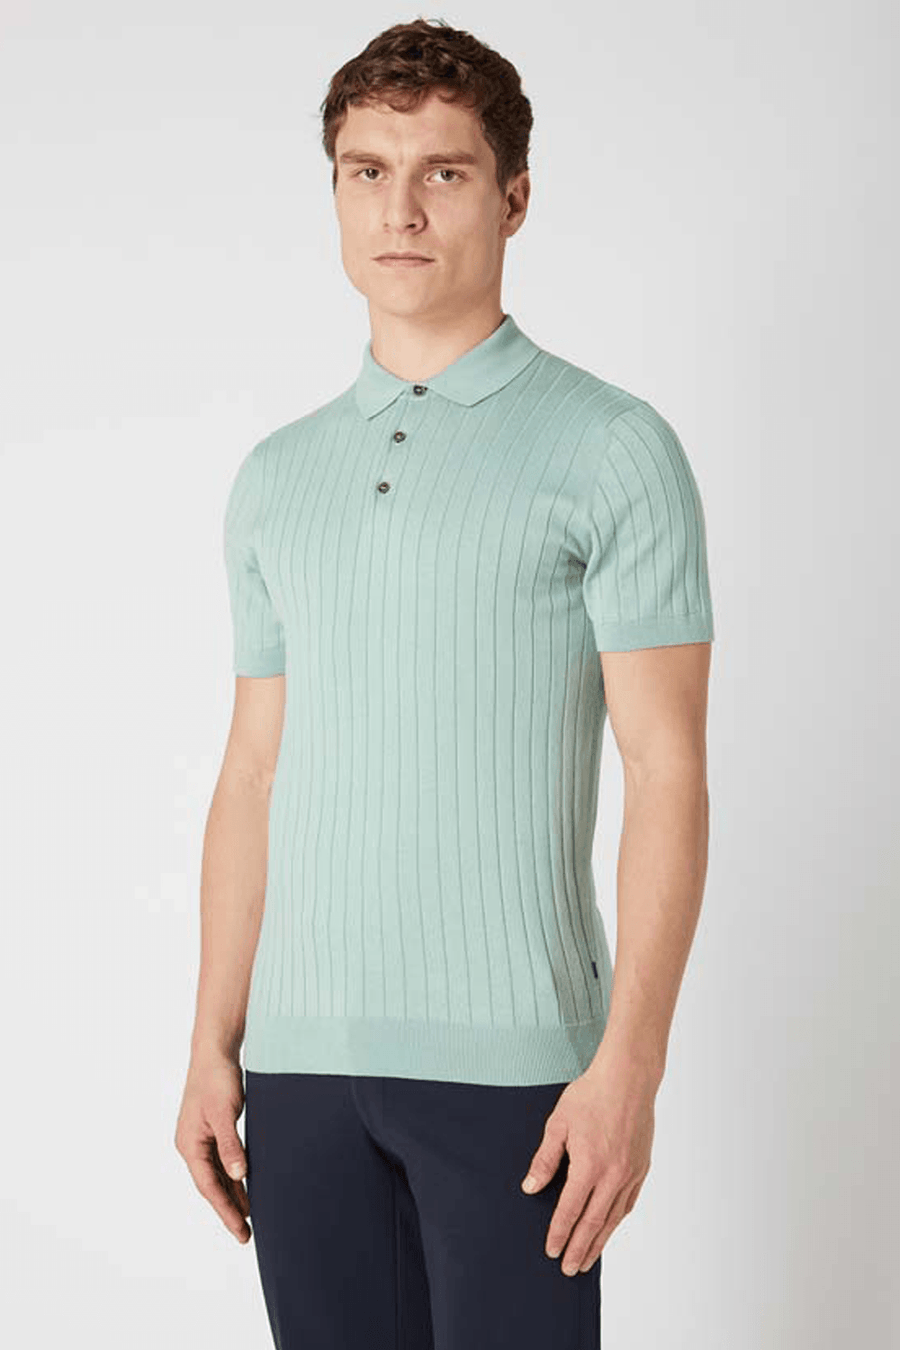 Buy the Remus Uomo Slim Fit Cotton S/S T-Shirt in Mint at Intro. Spend £50 for free UK delivery. Official stockists. We ship worldwide.